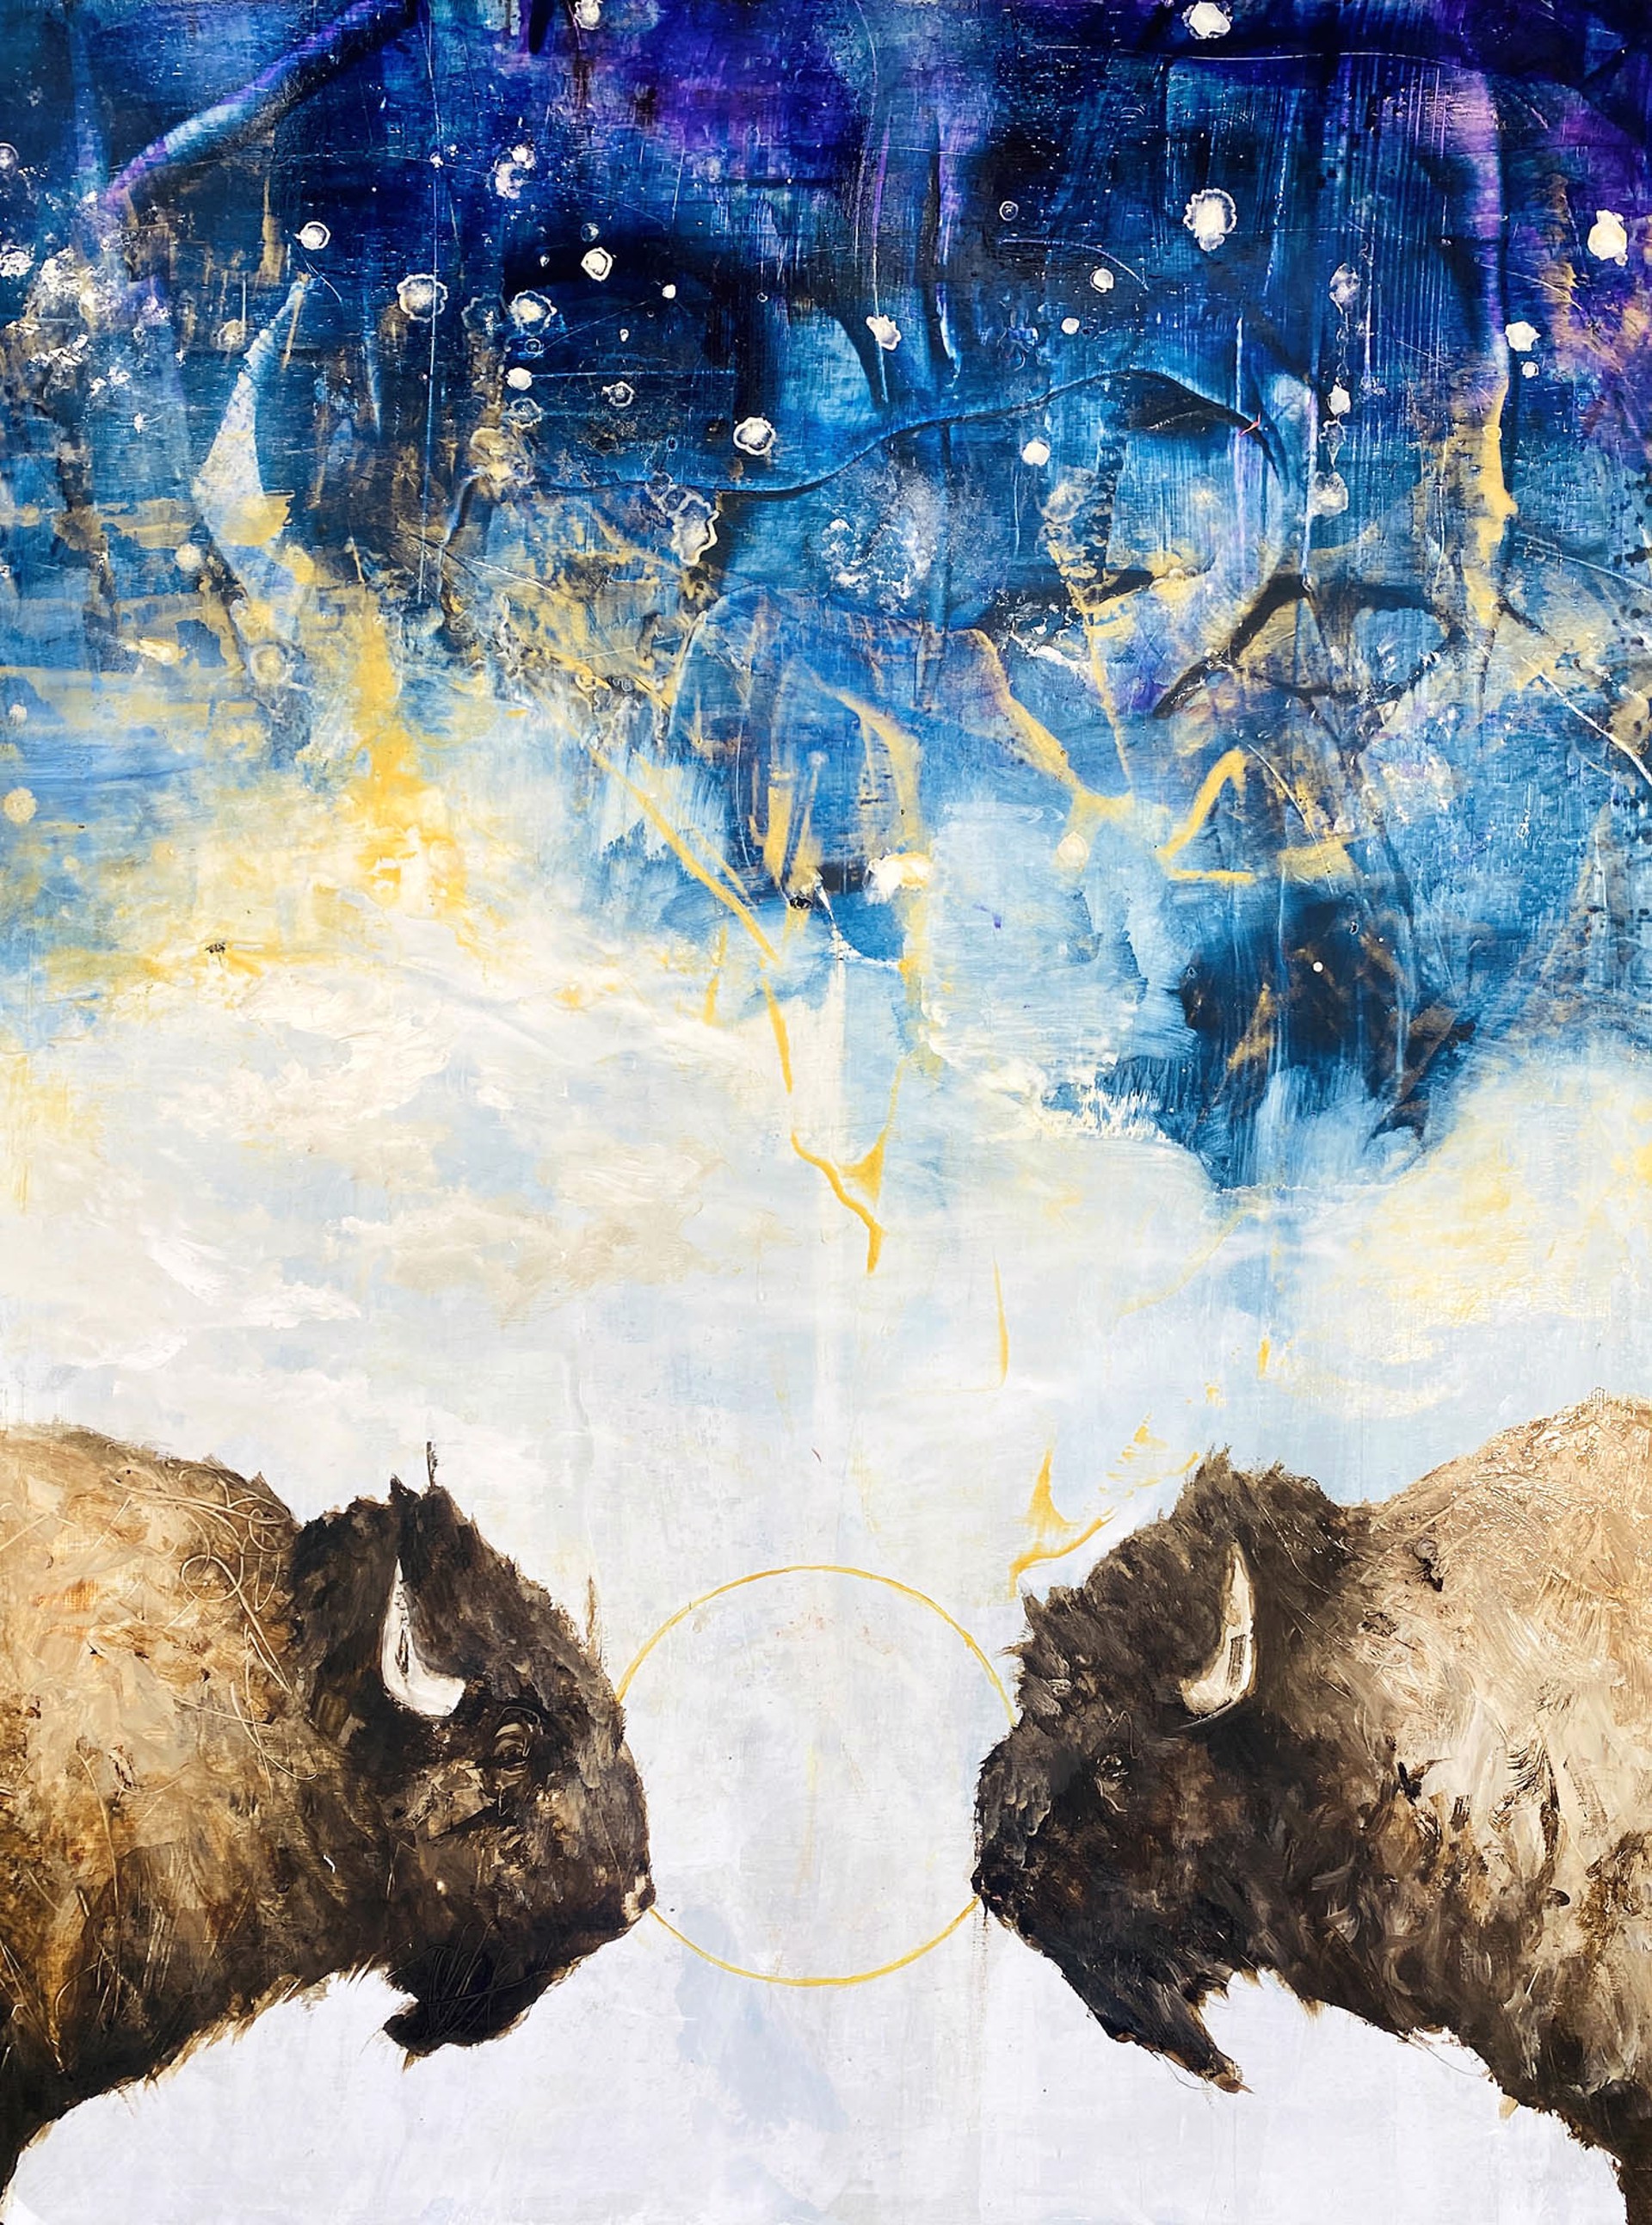 Original Oil Painting Featuring Two Bison Facing Each Other Over Abstract Starry Sky